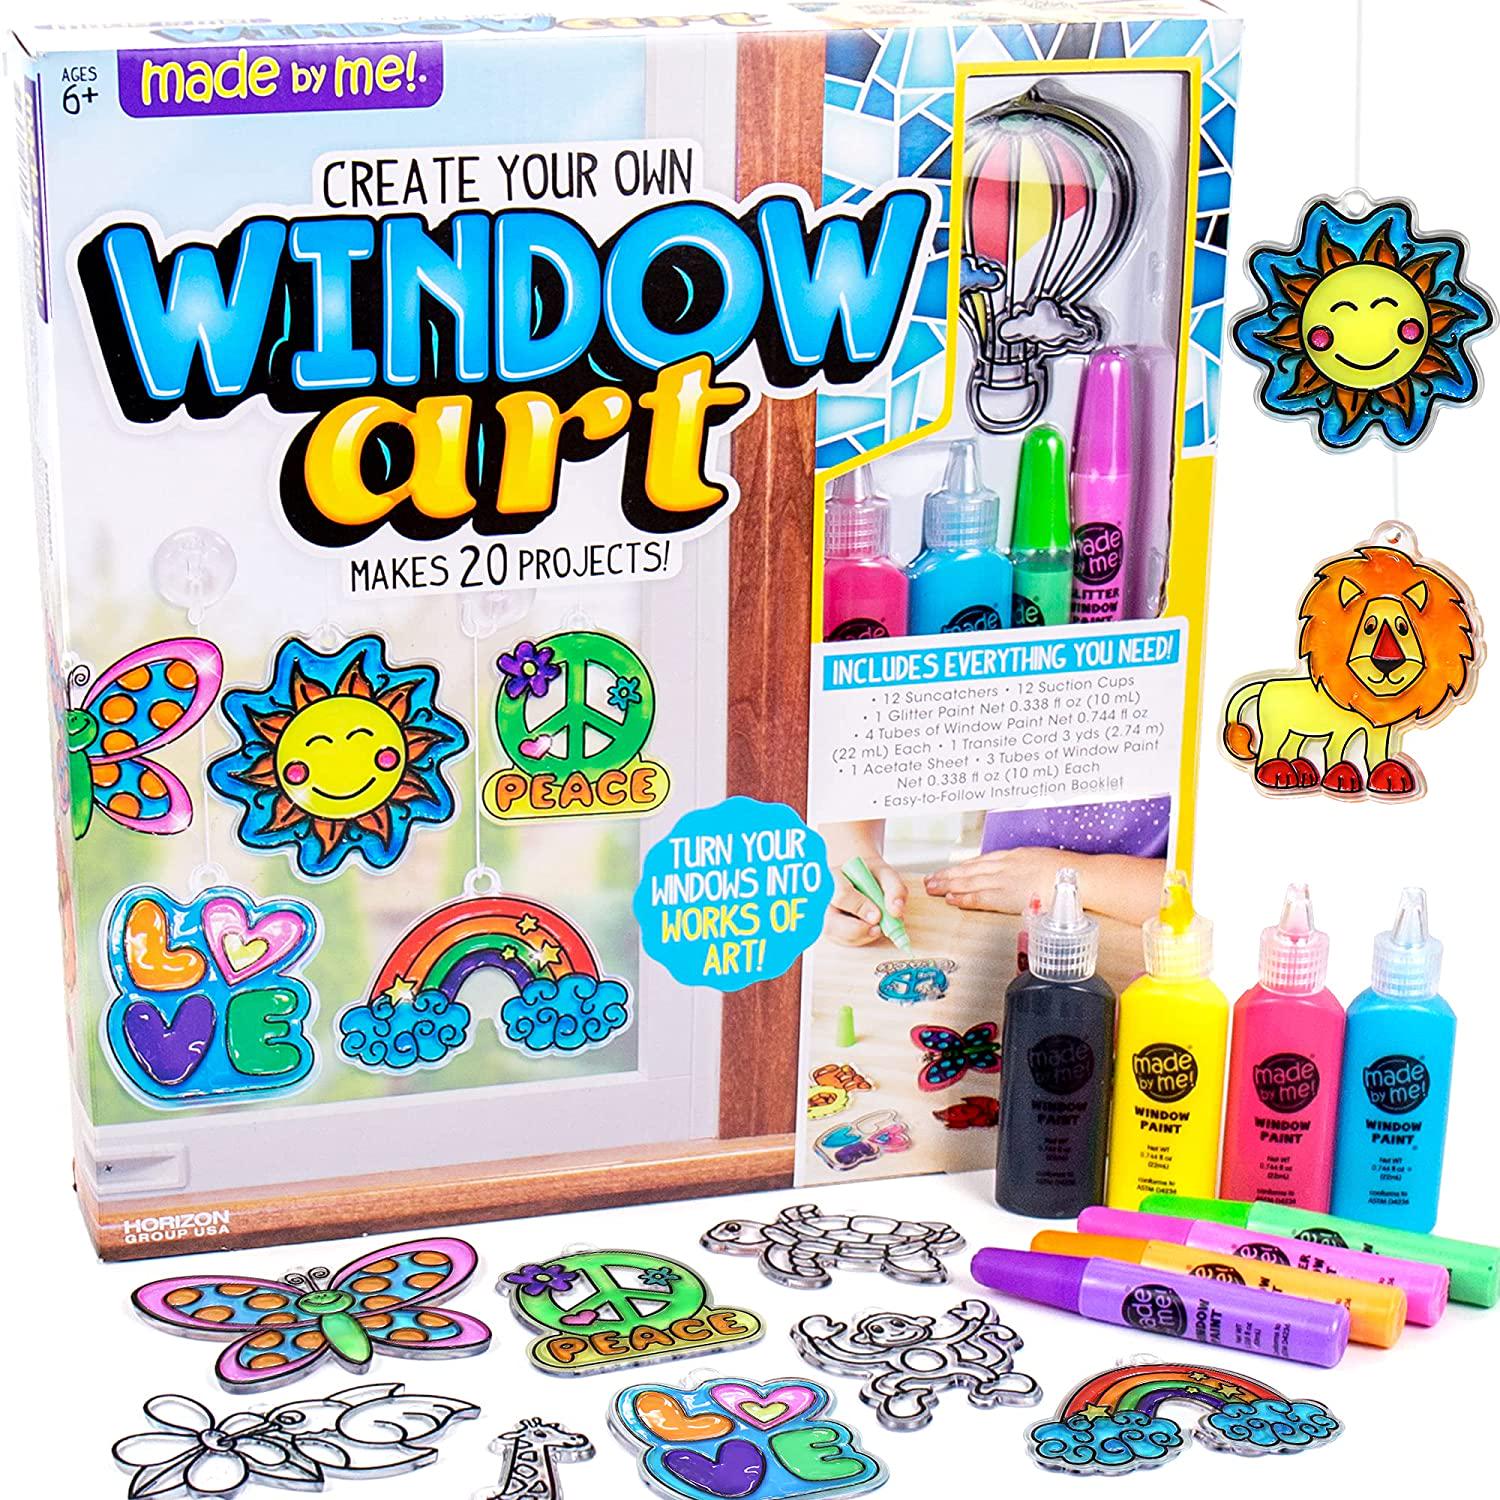 Made By Me, Made By Me Create Your Own Window Art - Paint Your Own Suncatchers - DIY Suncatchers - Arts and Craft Kits for Kids Ages 6 and Up